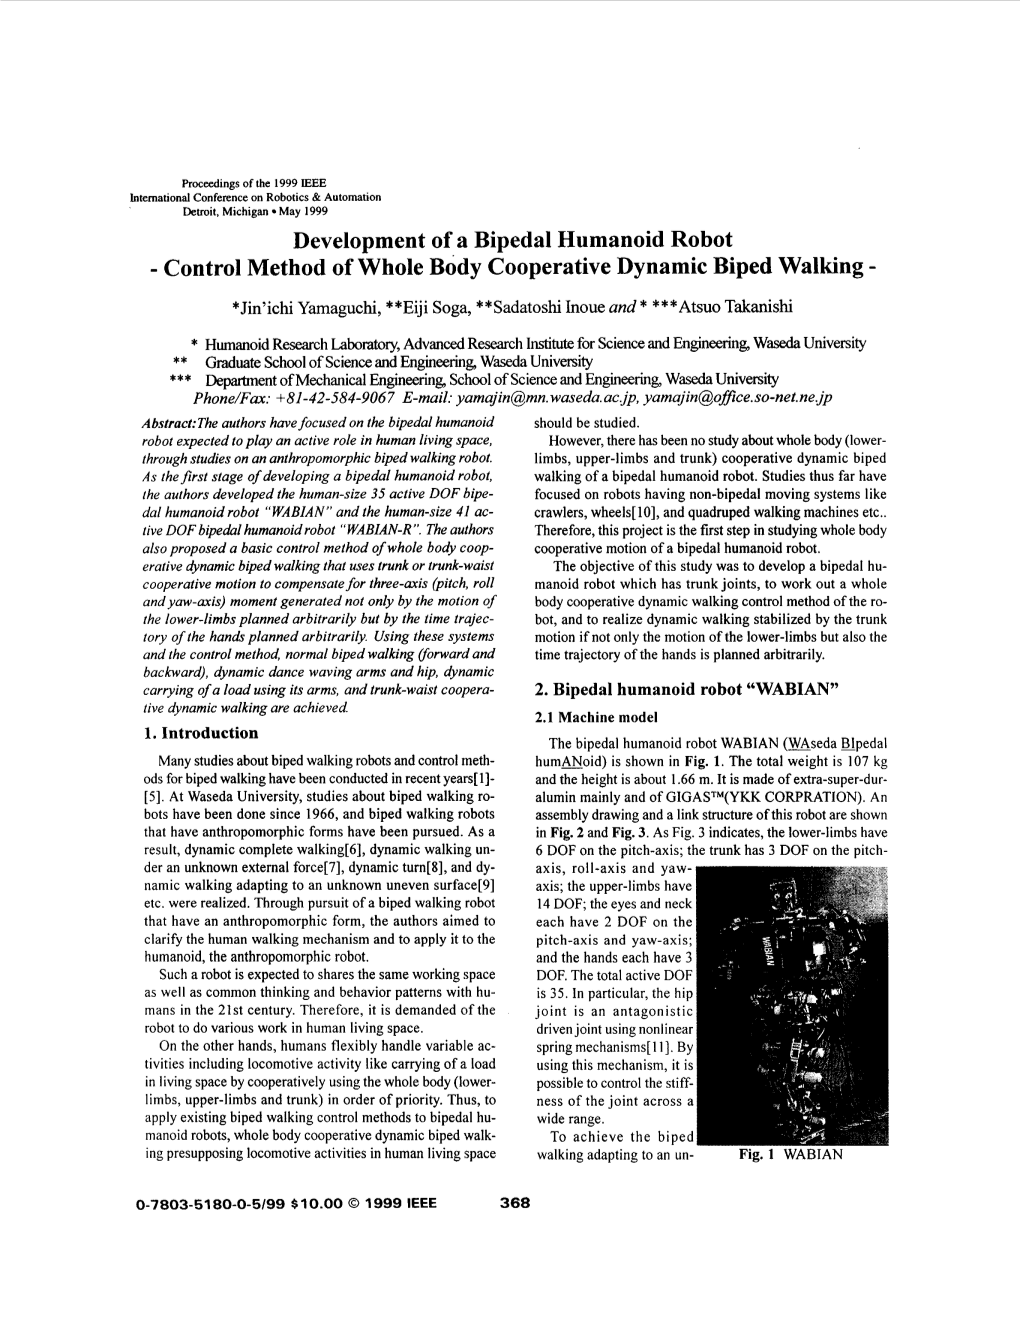 Development of a Bipedal Humanoid Robot-Control Method of Whole